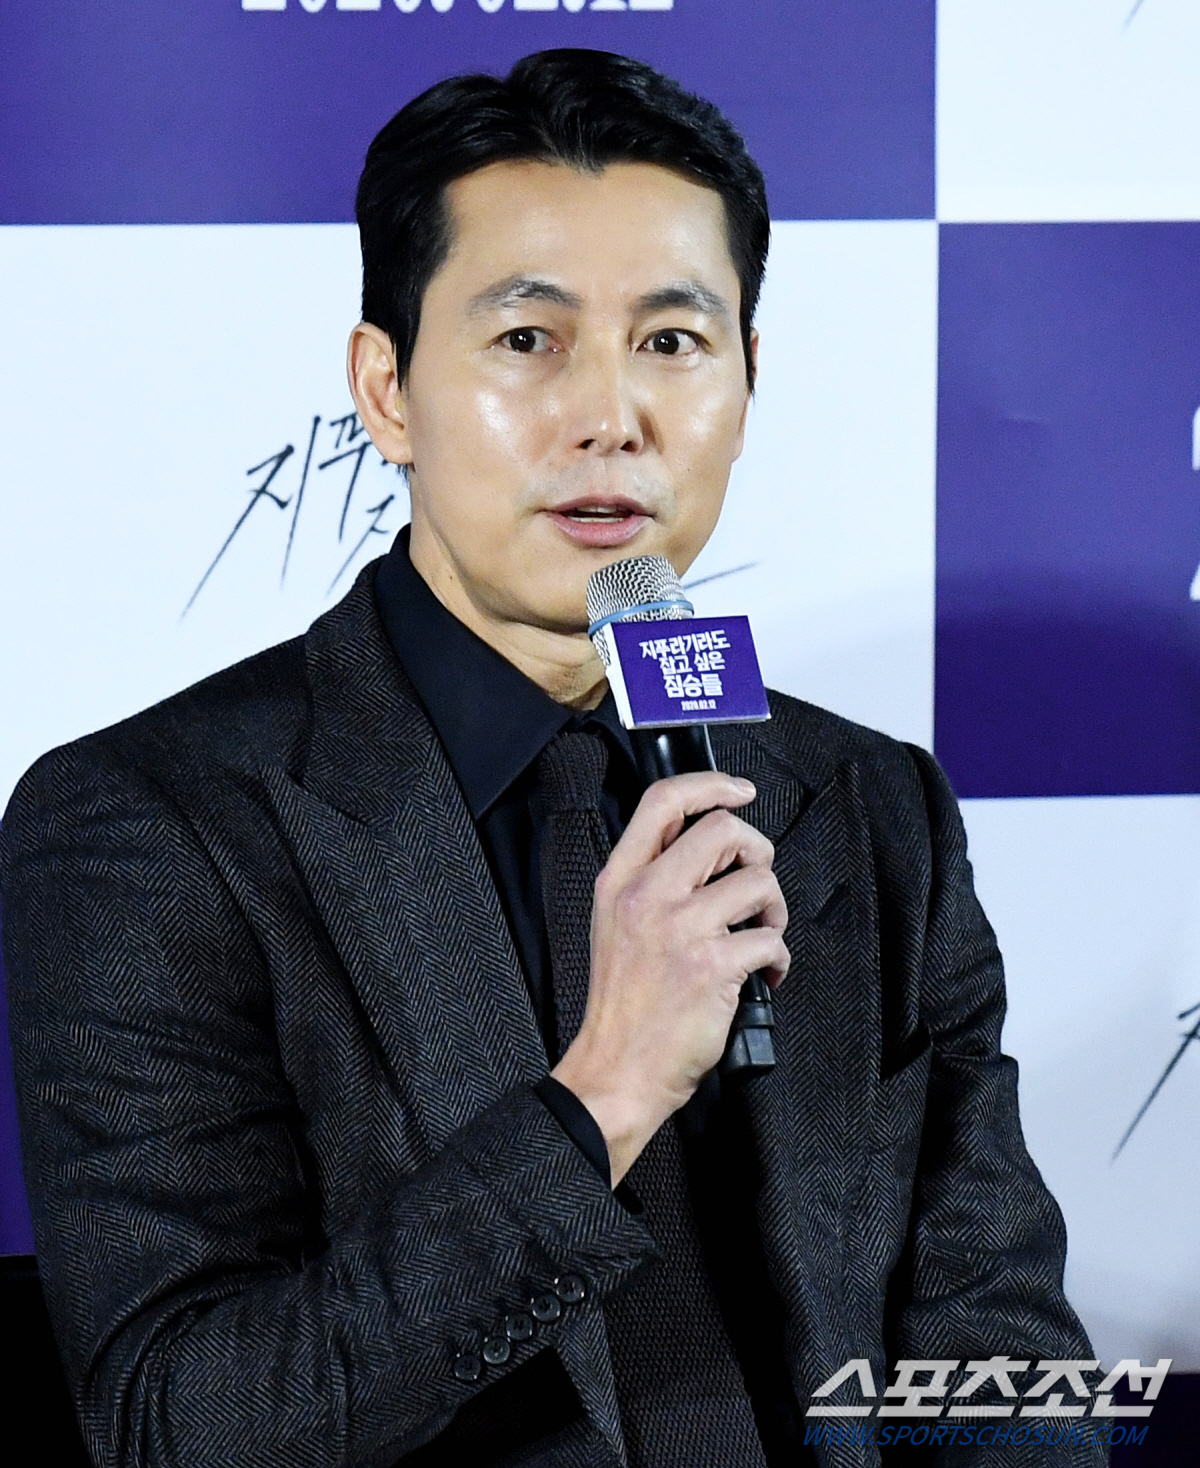 Actor Jung Woo-sung said, My first work since the Blue Dragon Film Awards, I did my best.On the morning of the 13th, a crime thriller movie The Animals Who Want to Hold a Jeep (directed by Kim Yong-hoon, produced by BA Entertainment and Megabox Central PlusM) was held at Megabox Seongsu, located in Wangsimniro 50, Seongdong-gu, Seoul.On this day, production briefing session includes Jeon Do-yeon of Yeonhee Station who seeks others to live a new life by erasing the past, Jung Woo-sung of Taeyoung Station, who is suffering from debts due to his lost lover, Youn Yuh-jung of Nomo Sunja Station, Shin Hyun-bin of the station, Jung Ga-ram of the illegal immigrant Jin Tae station, and director Kim Yong-hoon attended.Jung Woo-sung is the work that was finished before receiving the awards in the Beasts who want to catch even the straw which was presented as the first work after winning the Blue Dragon Film Award.Of course, the weight and encouragement of the prize are very important, but it seems to be more important to show a clear performance to my colleagues in front of me.I tried to do my best in the animals that want to catch even straw. I hope that such a figure will be reflected well and delivered to the audience. The animals that want to catch straws, based on the same novel by Sonne Kaske, are criminal dramas of ordinary humans planning the worst of the worst to take the money bag, the last chance of life.Jeon Do-yeon, Jung Woo-sung, Bae Sung-woo, Jung Man-sik, Jin Kyung, Shin Hyun-bin, Jung Ga-ram, Park Ji-hwan, Kim Jun-han, Heo Dong Won, and Youn Yuh-jung.It will be released on February 12th.